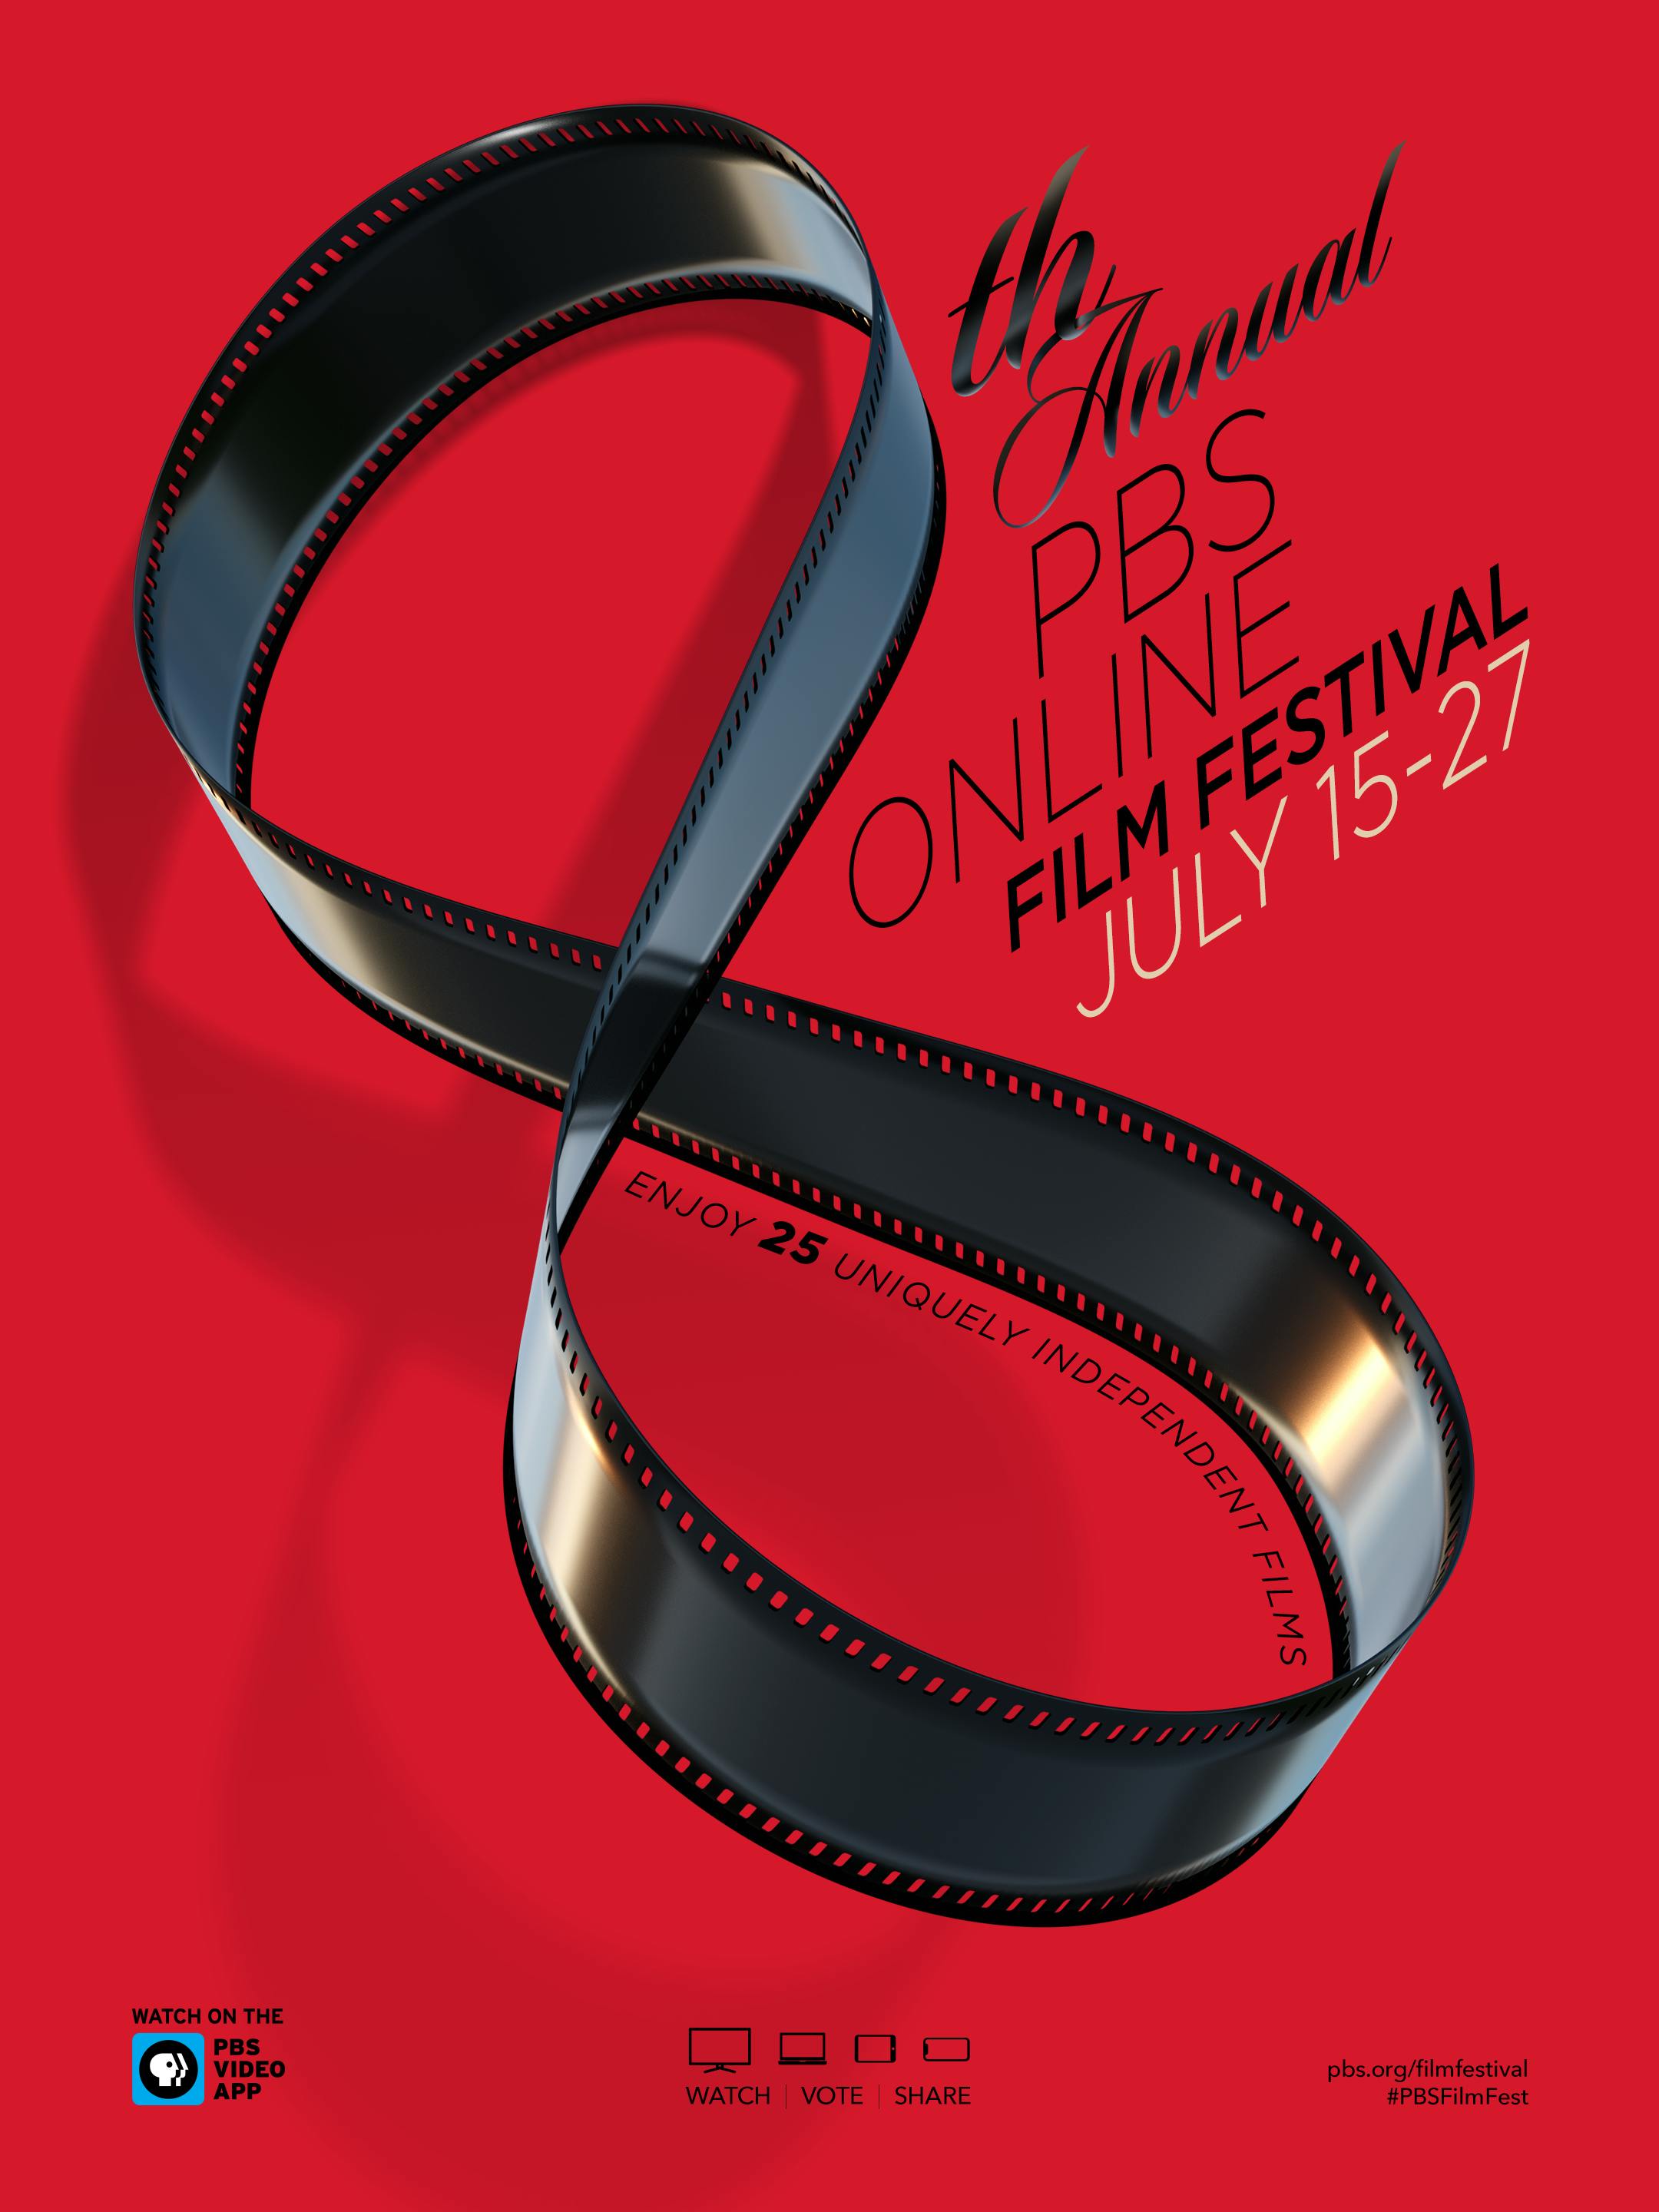 Poster for the 8th annual PBS online film festival